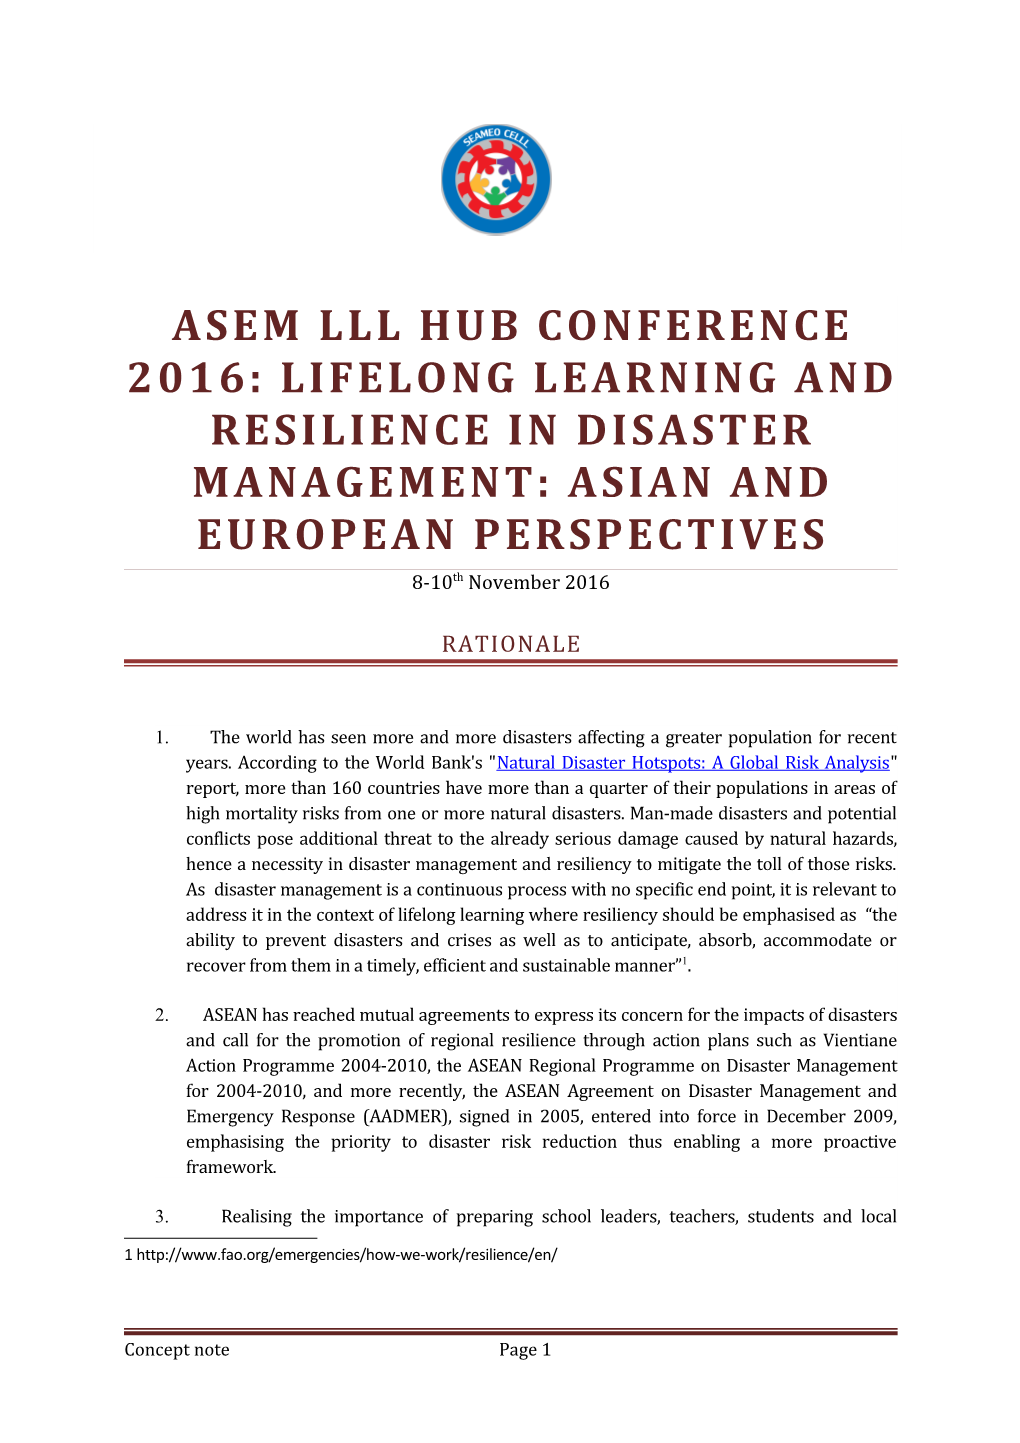 ASEM LLL HUB CONFERENCE 2016: Lifelong Learning and Resilience in Disaster Management